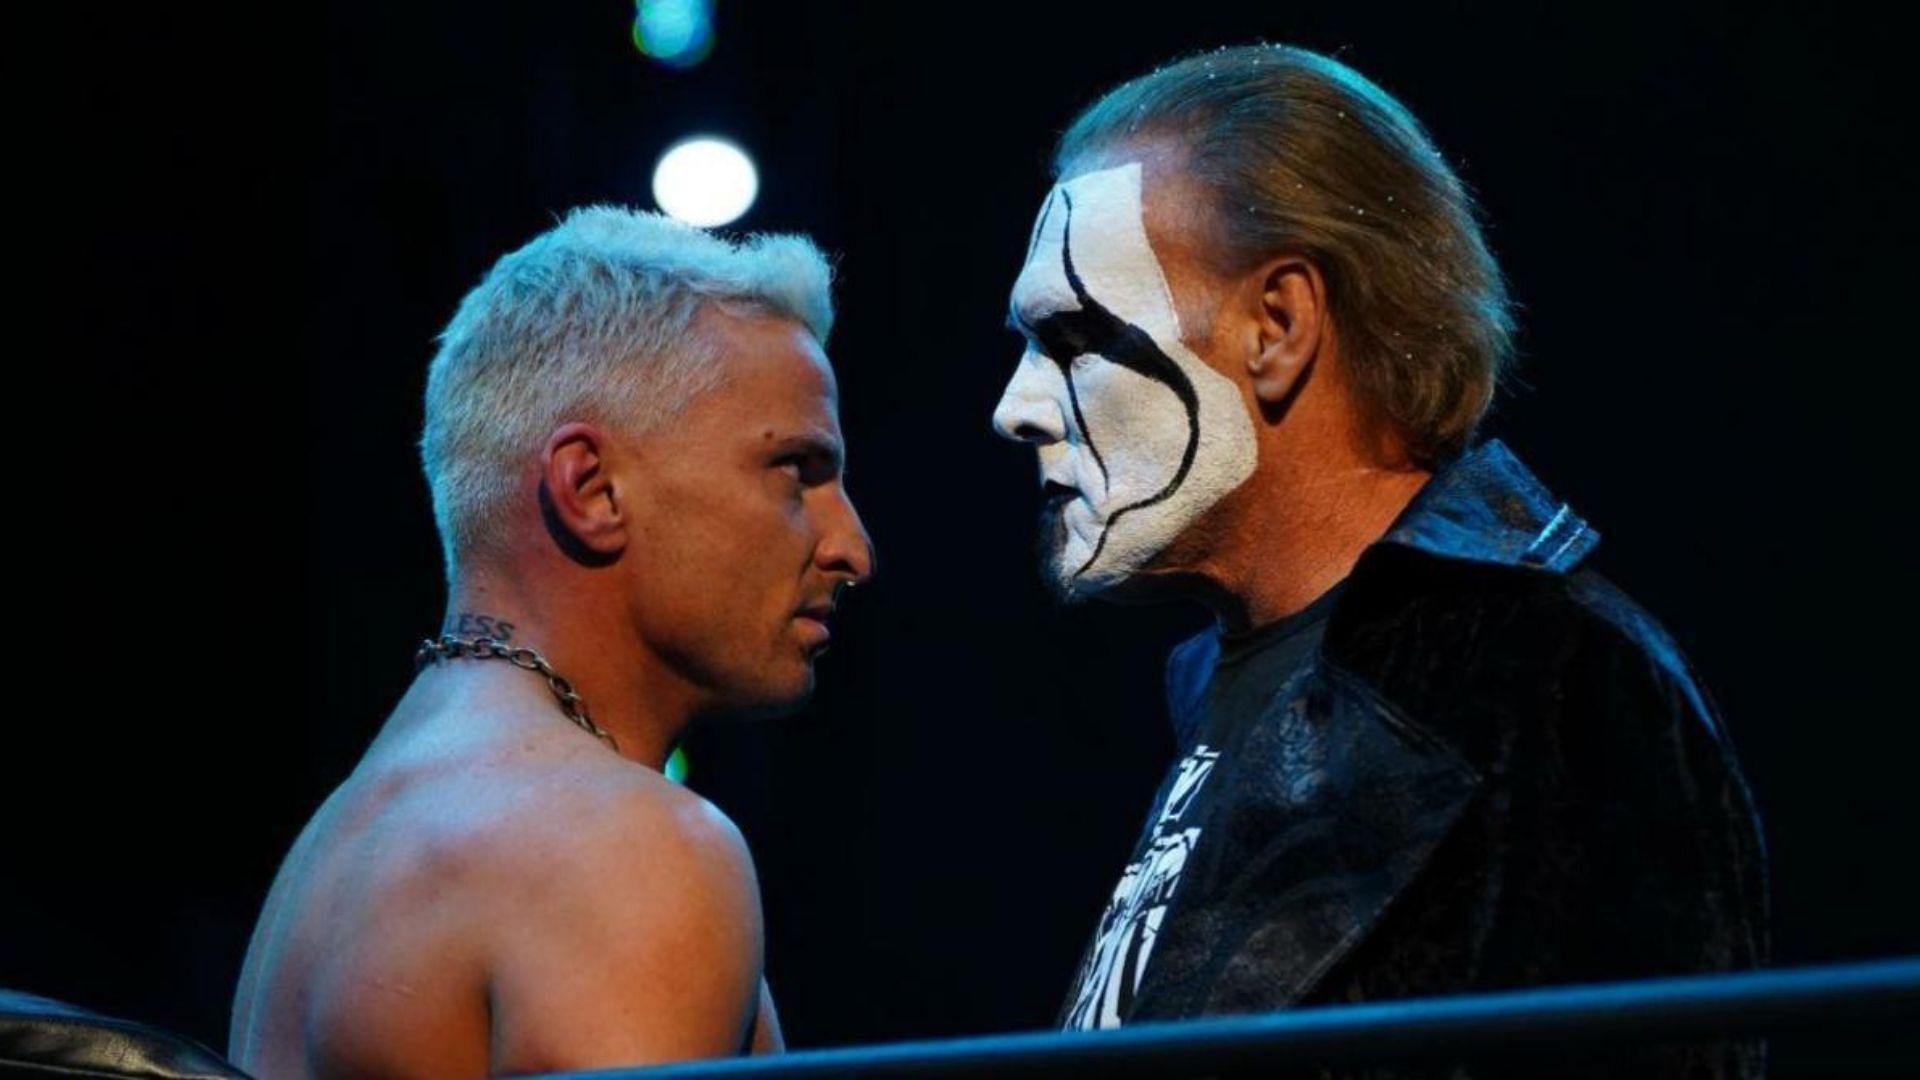 Could this be the next step for Sting and Darby Allin?